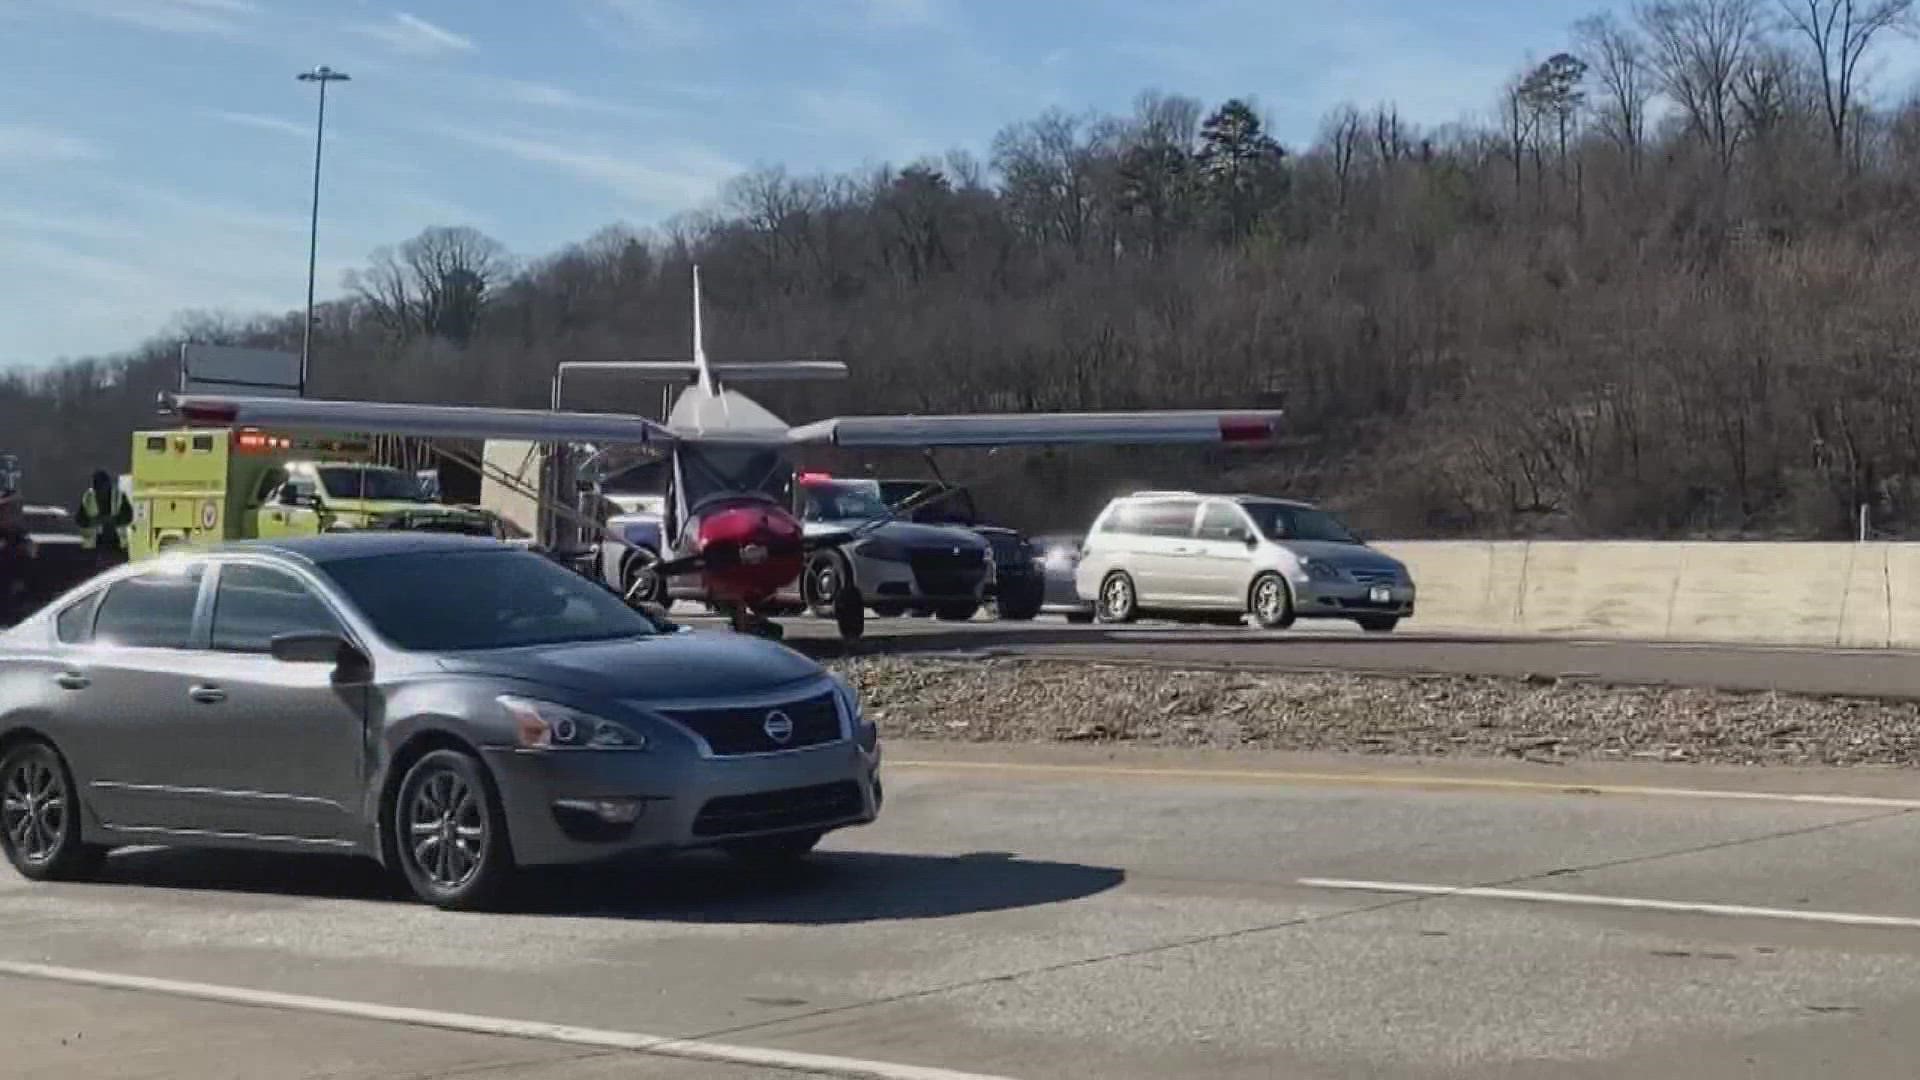 Knoxville police and federal authorities are investigating the cause of a single-engine plane that made an emergency landing on I-40 in West Knoxville.